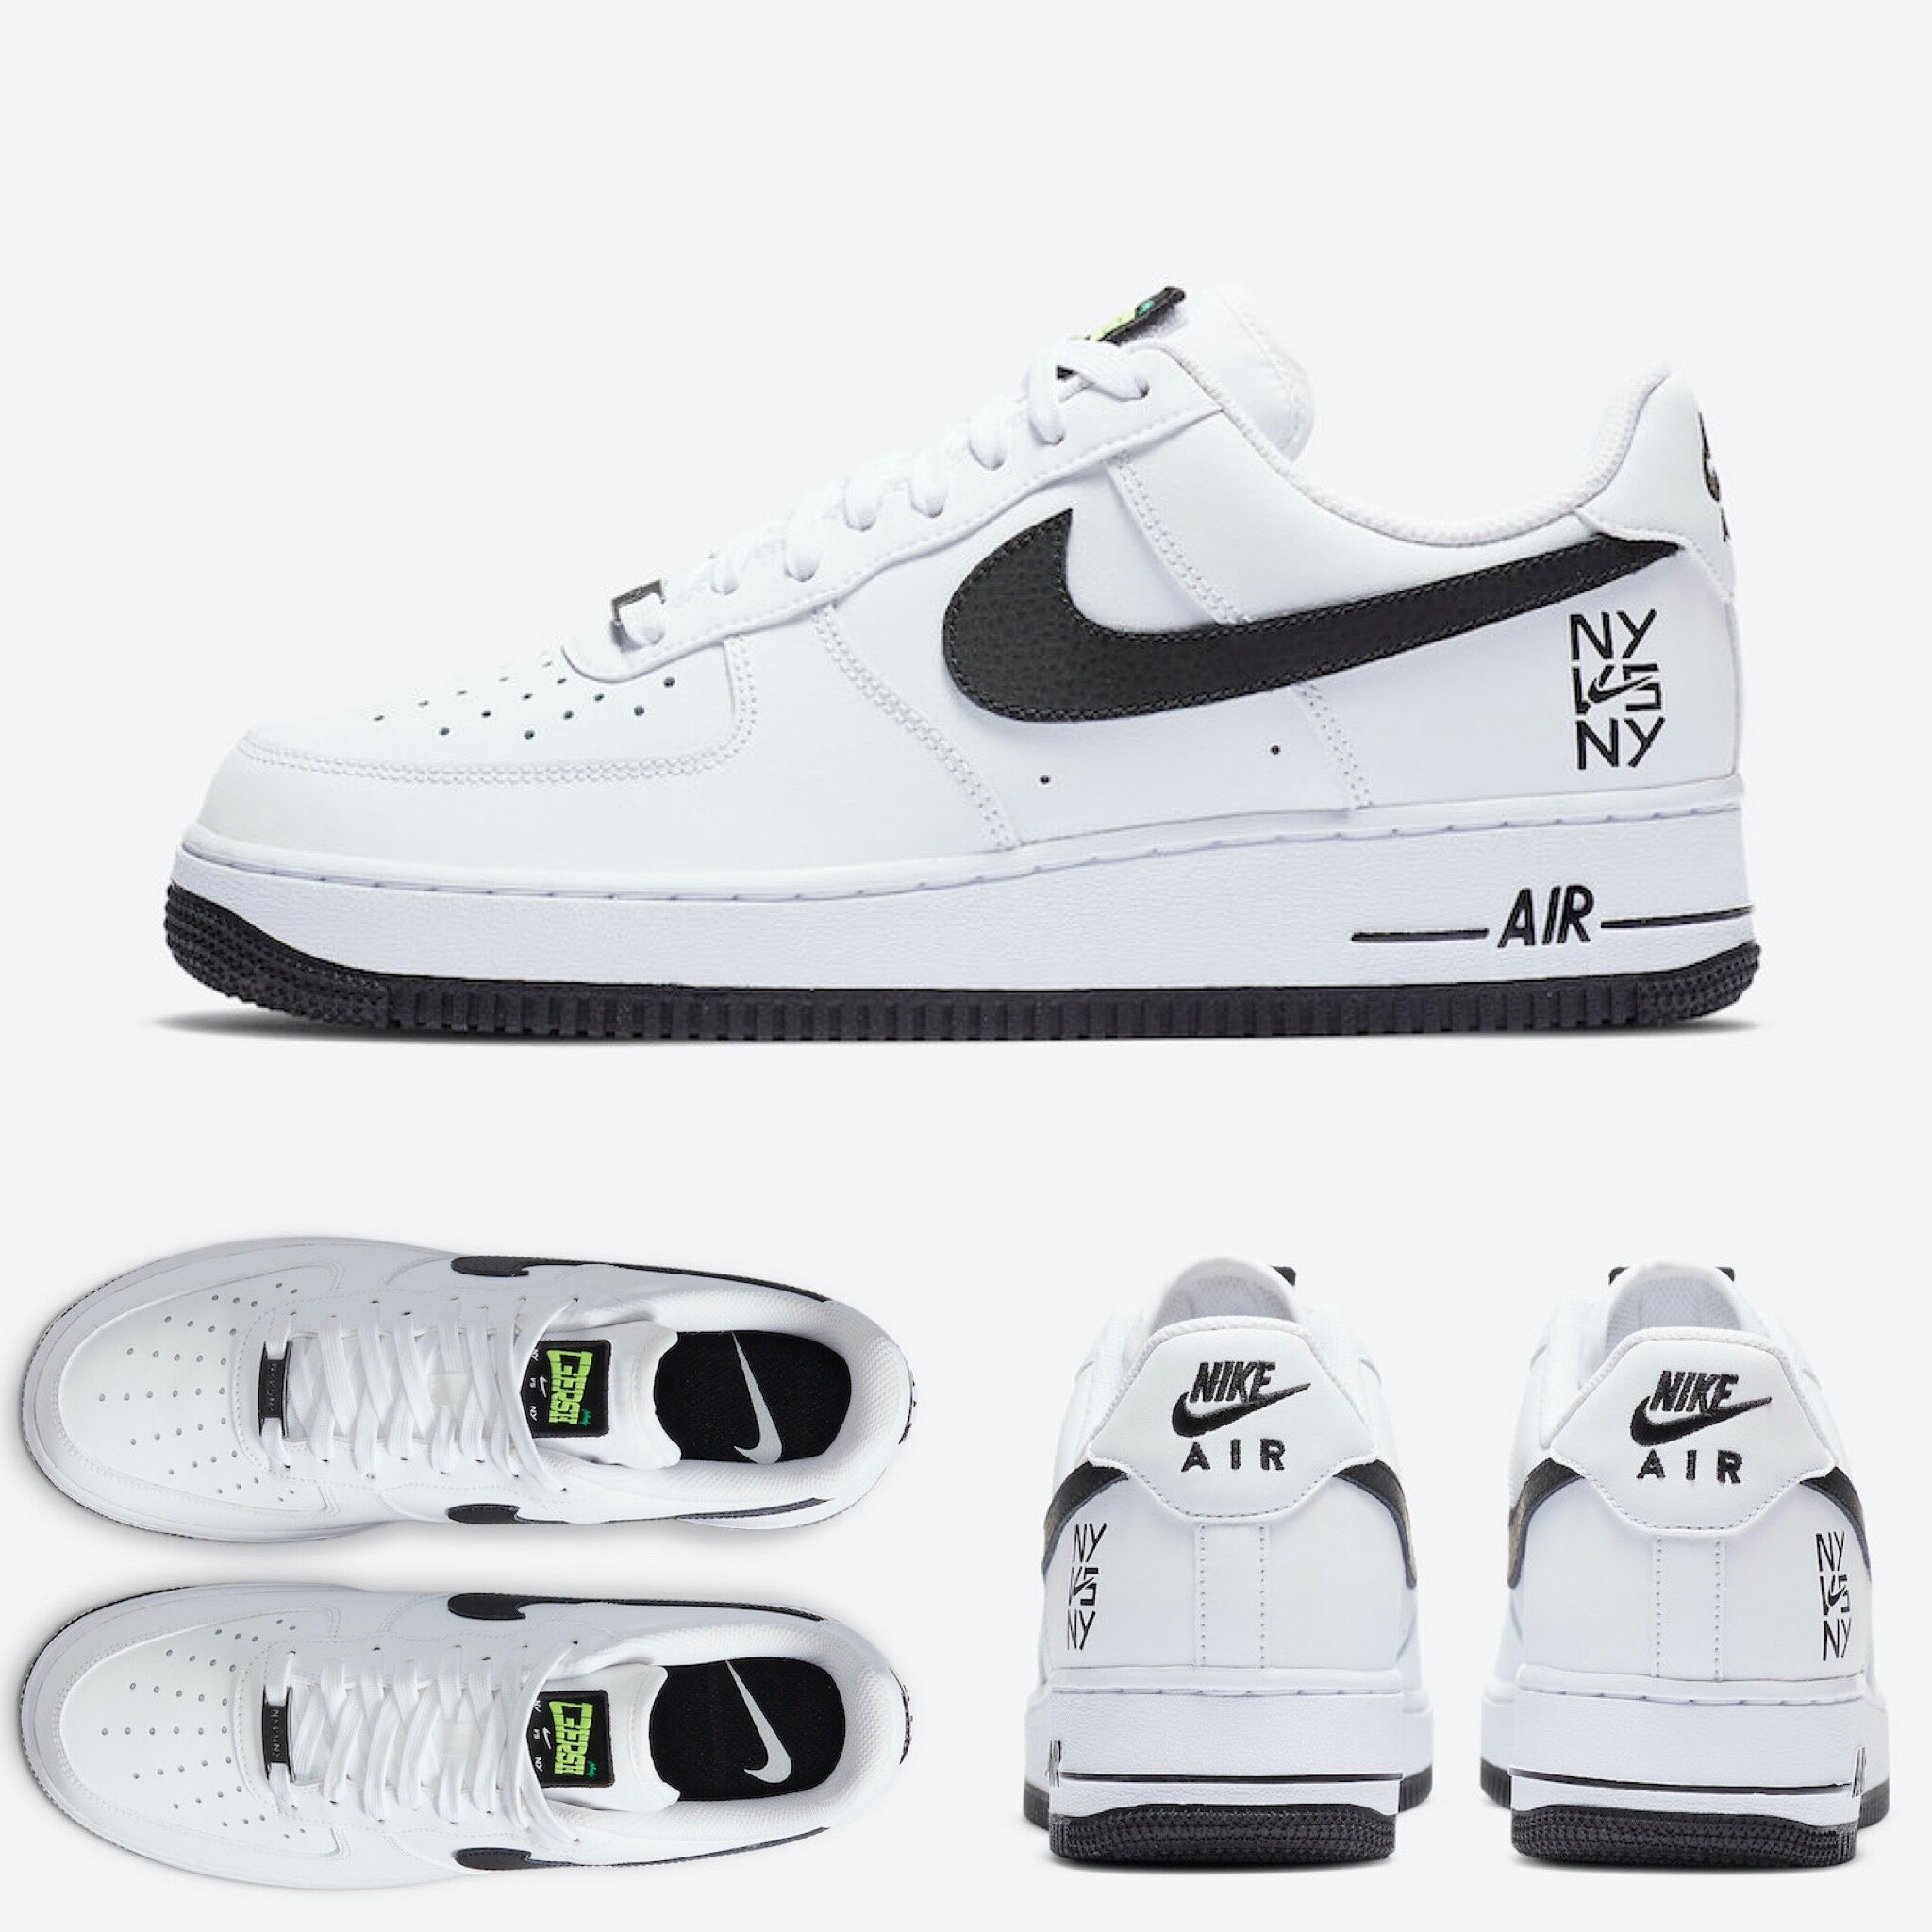 Now Available: Nike Air Force 1 Low "NY vs NYC" — Sneaker Shouts